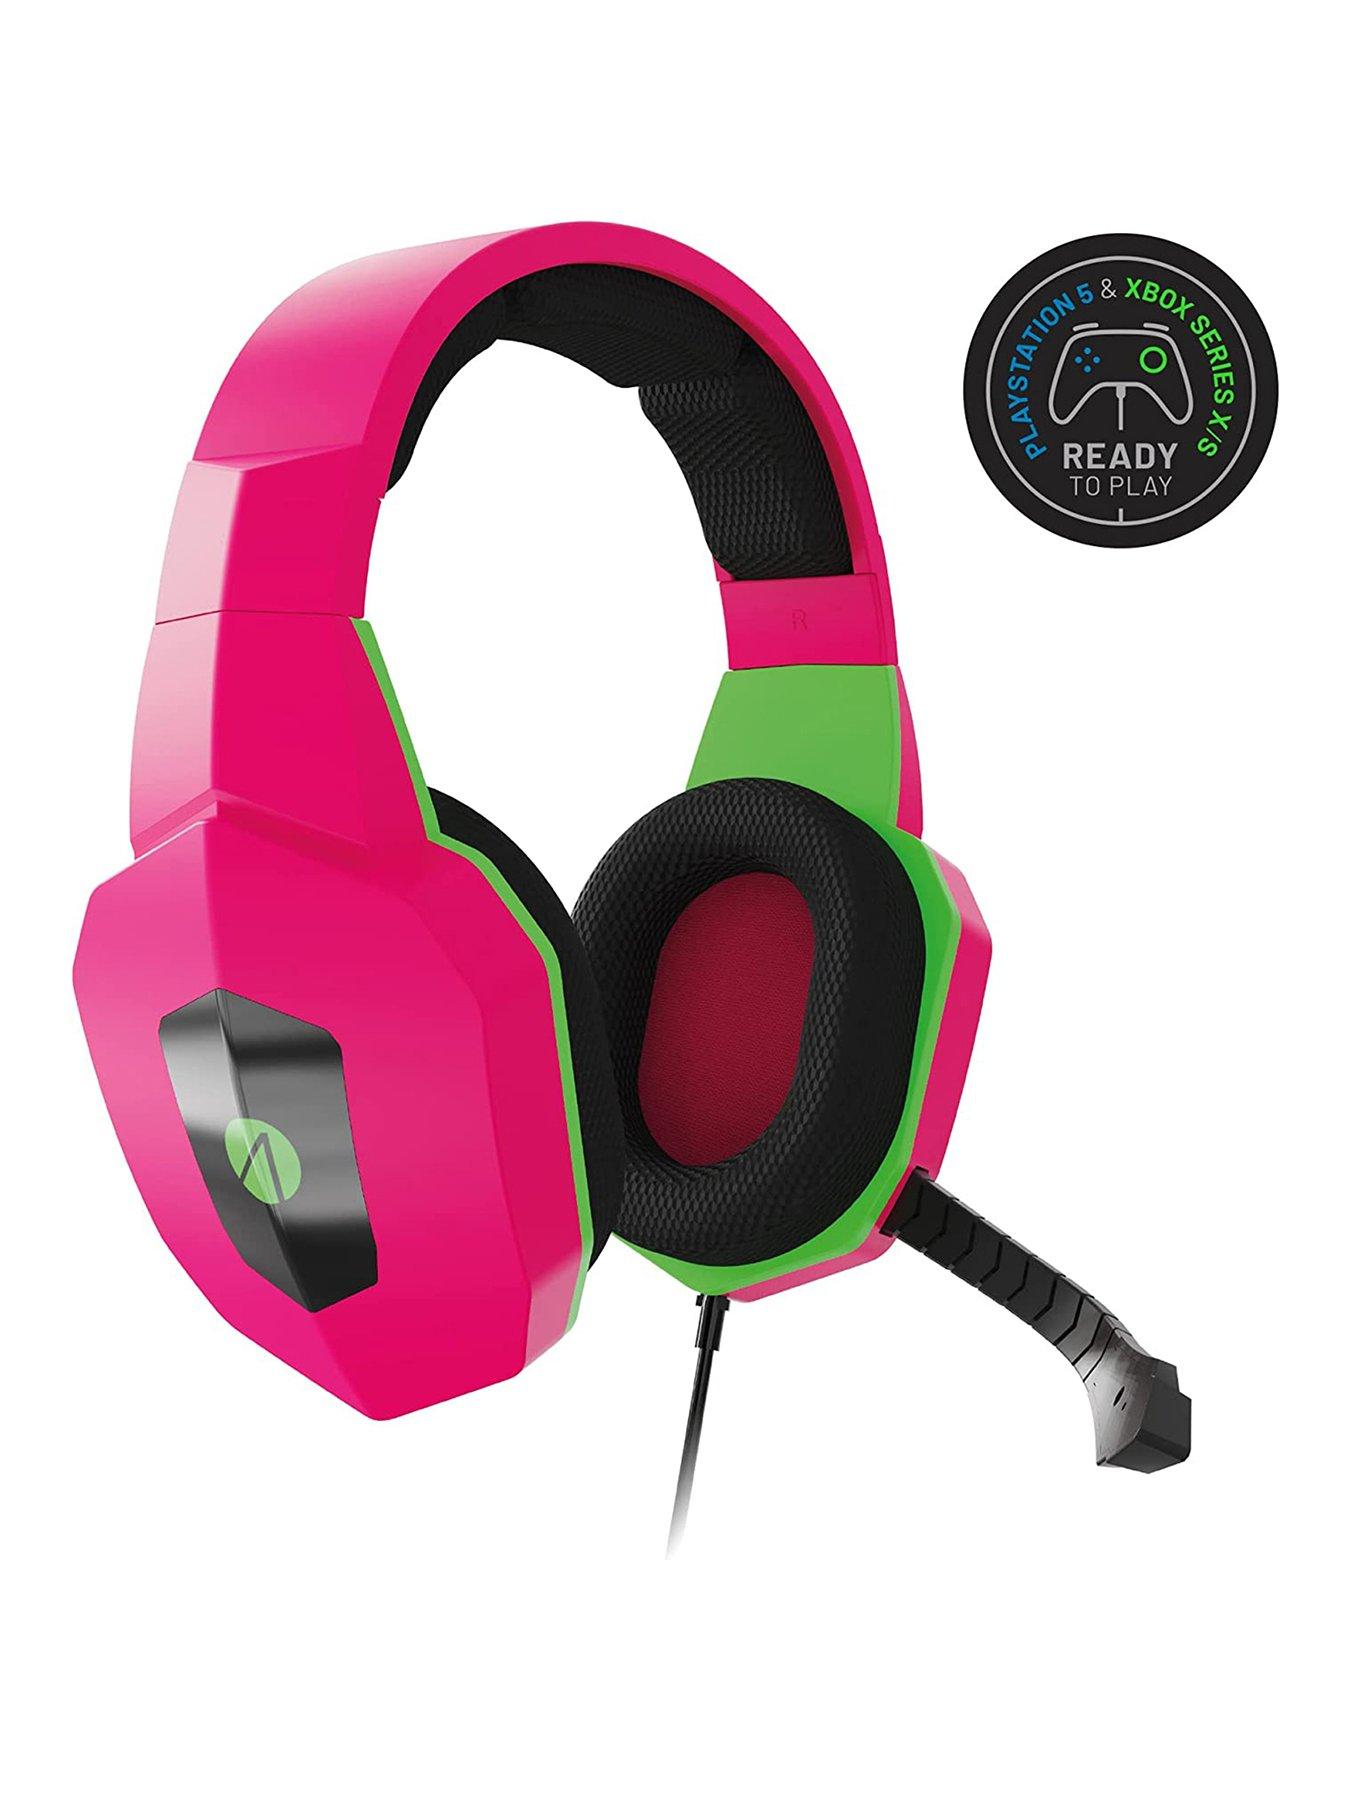 PC & Switch, for Neon Gaming - Green Stealth Edition XBOX, PS4/PS5, - Headset Pink